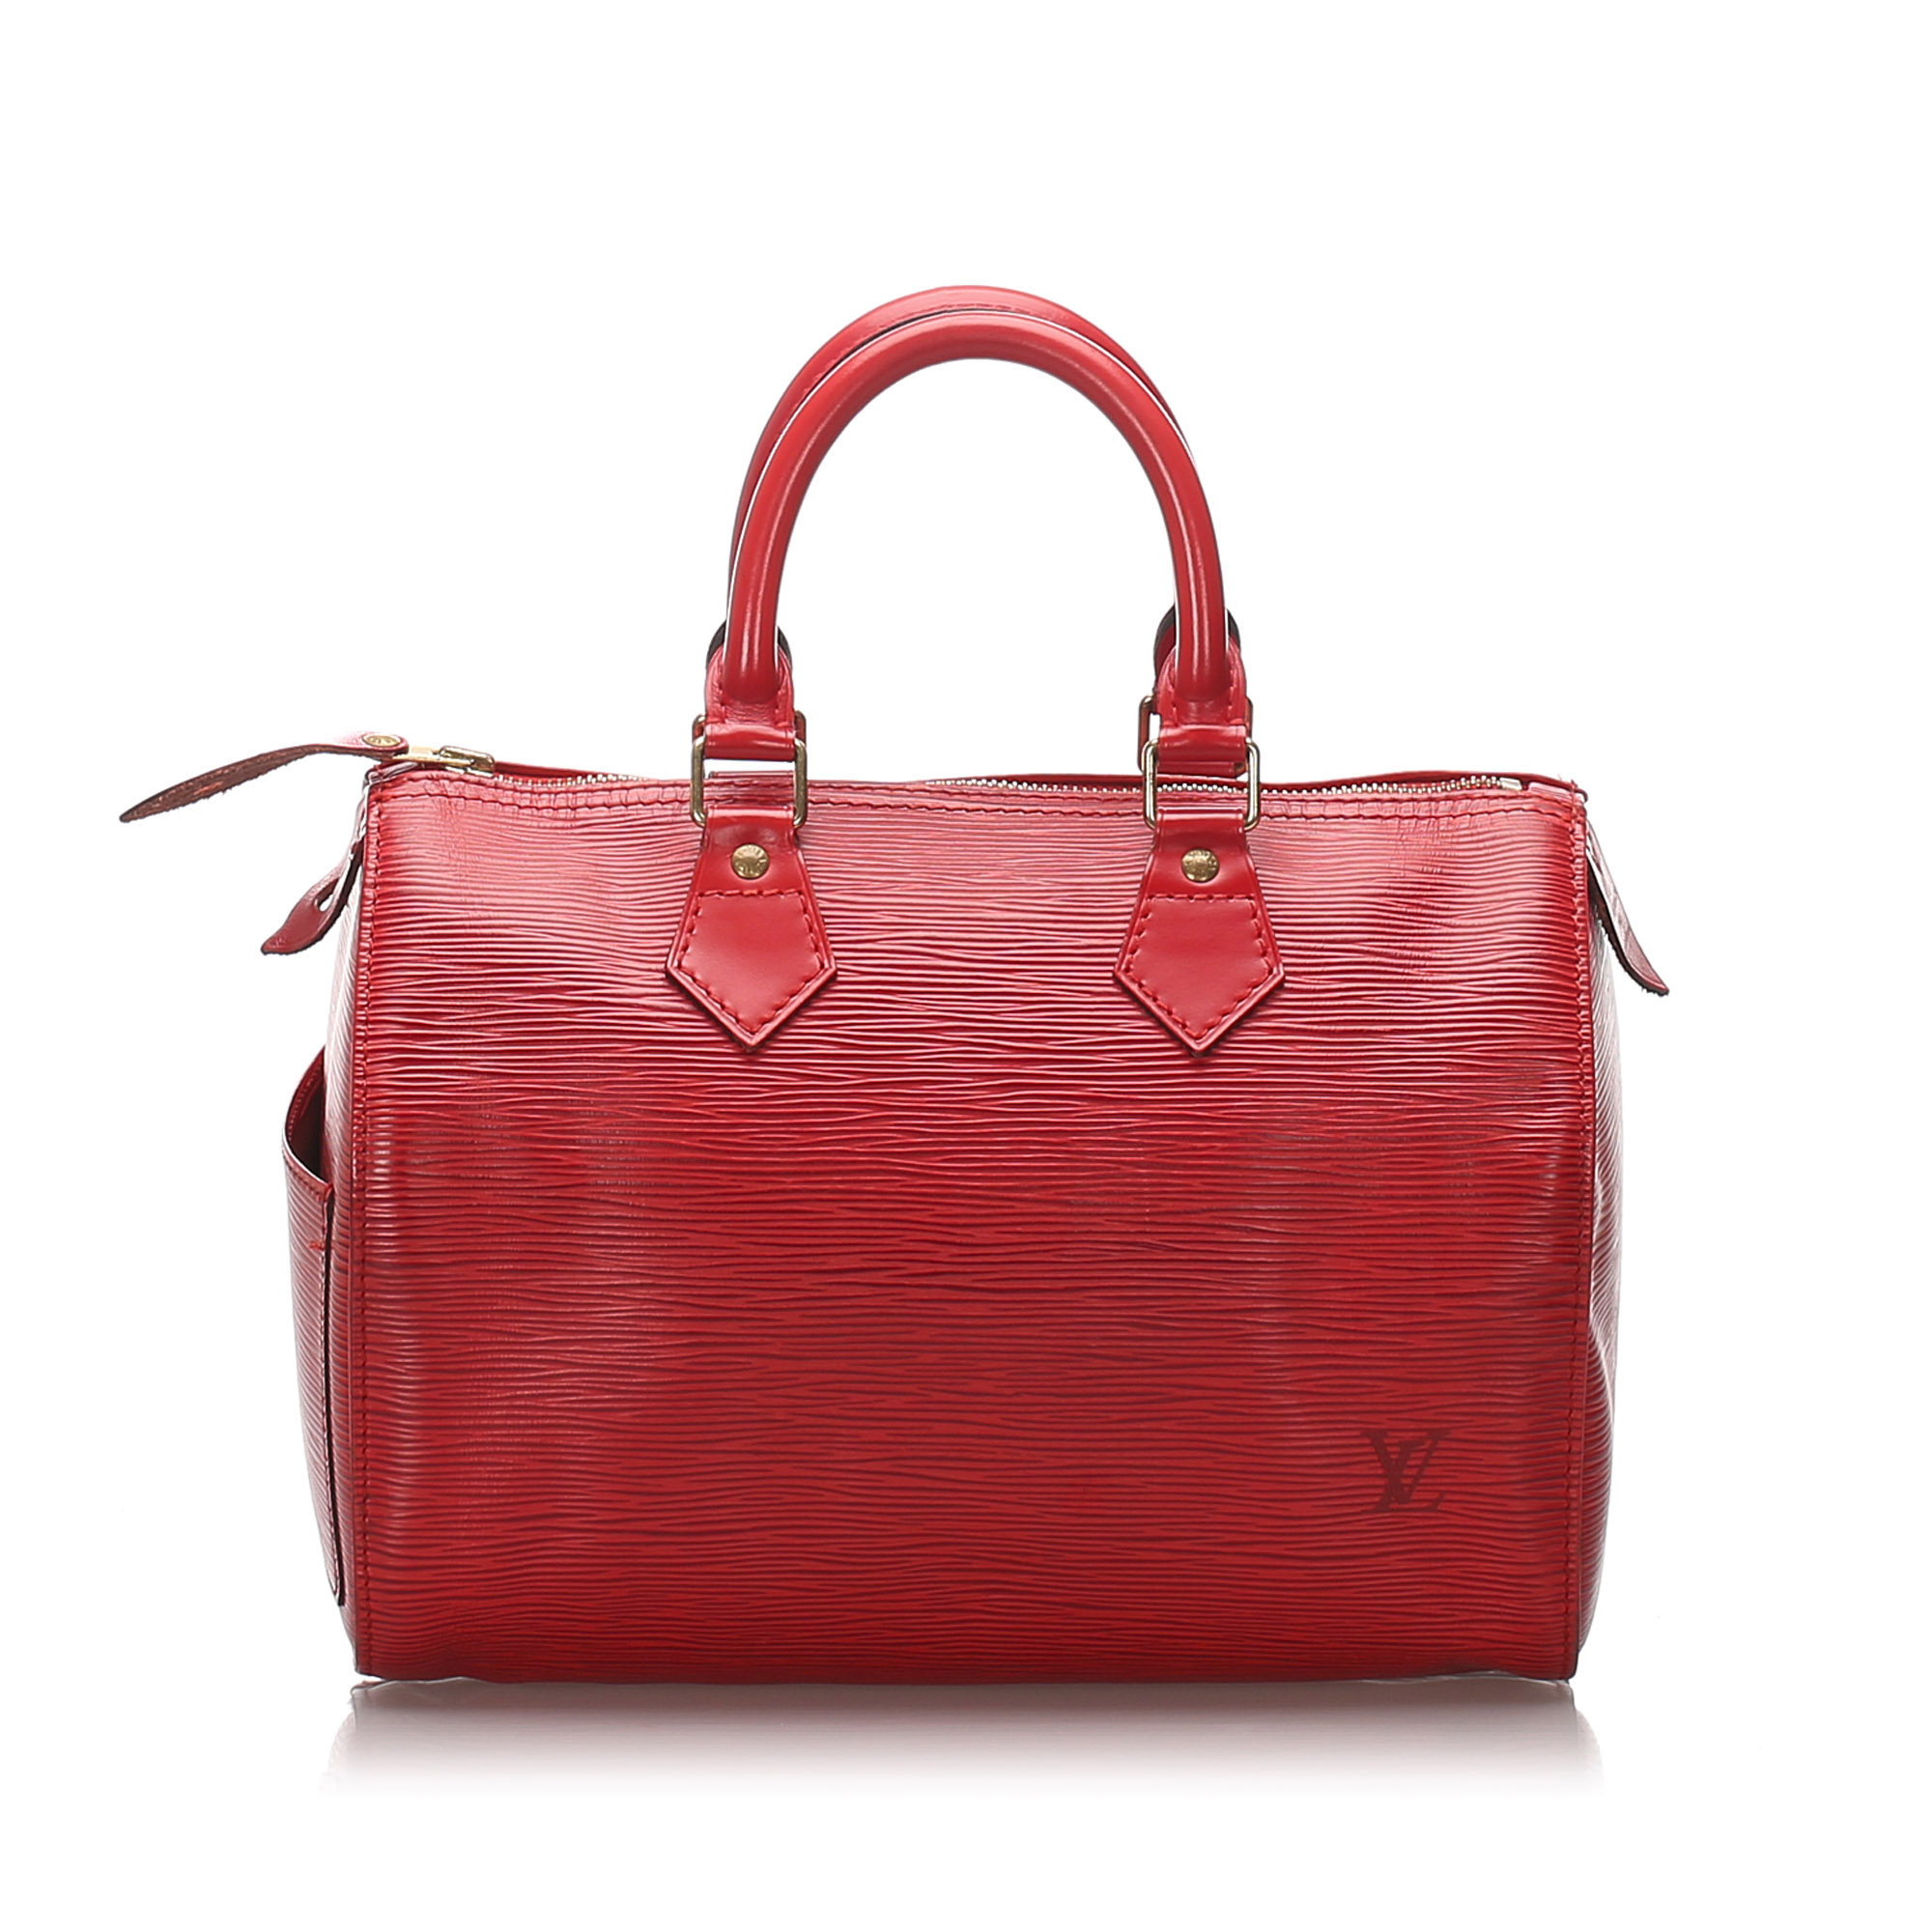 Pre-Loved Louis Vuitton Red Epi Leather Speedy 25 France | eBay